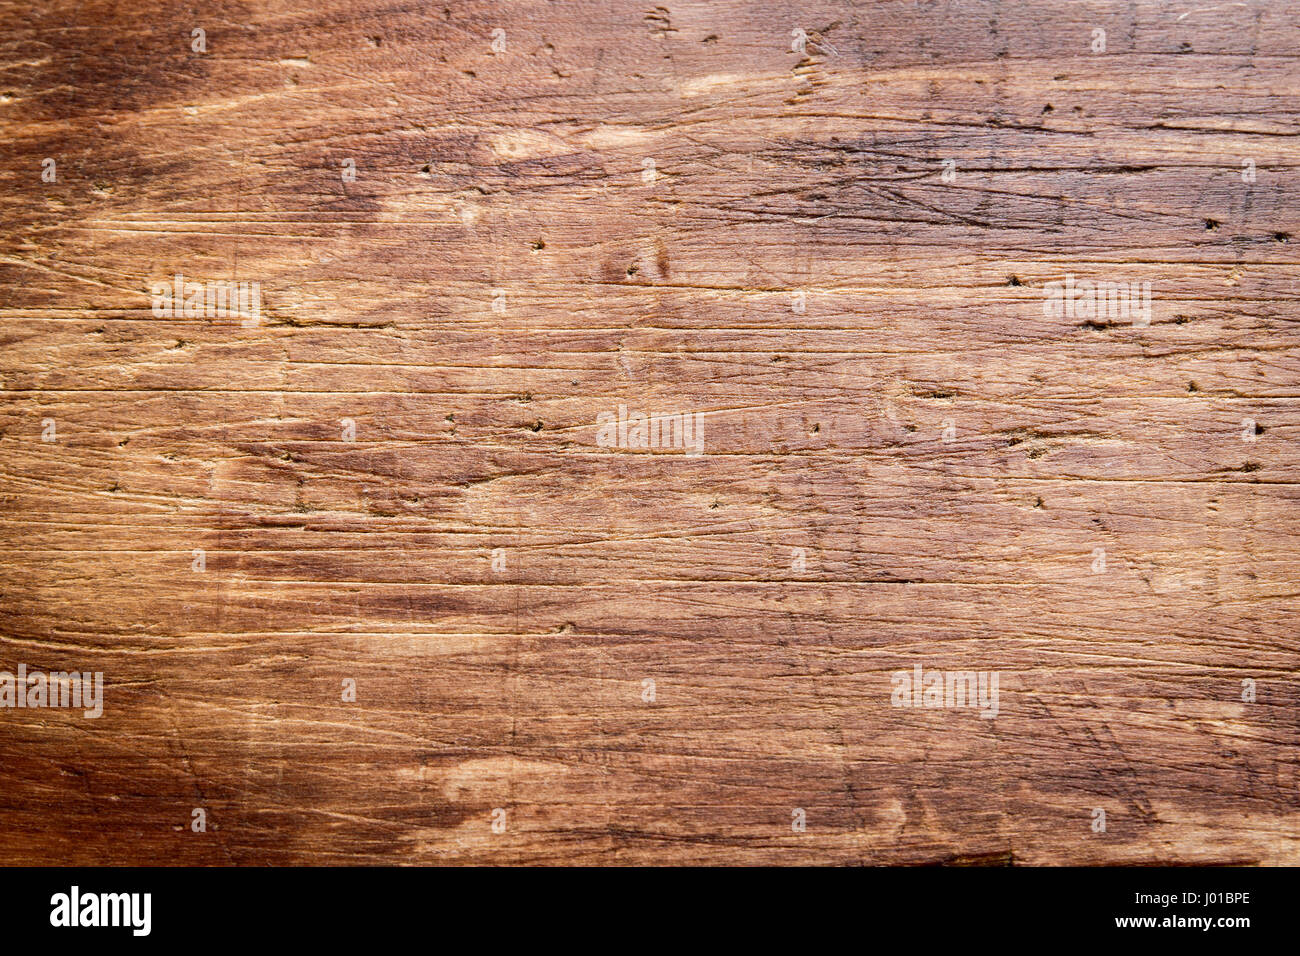 Rustic wooden cutting board background close up - rustic empty copy space for text, design element Stock Photo